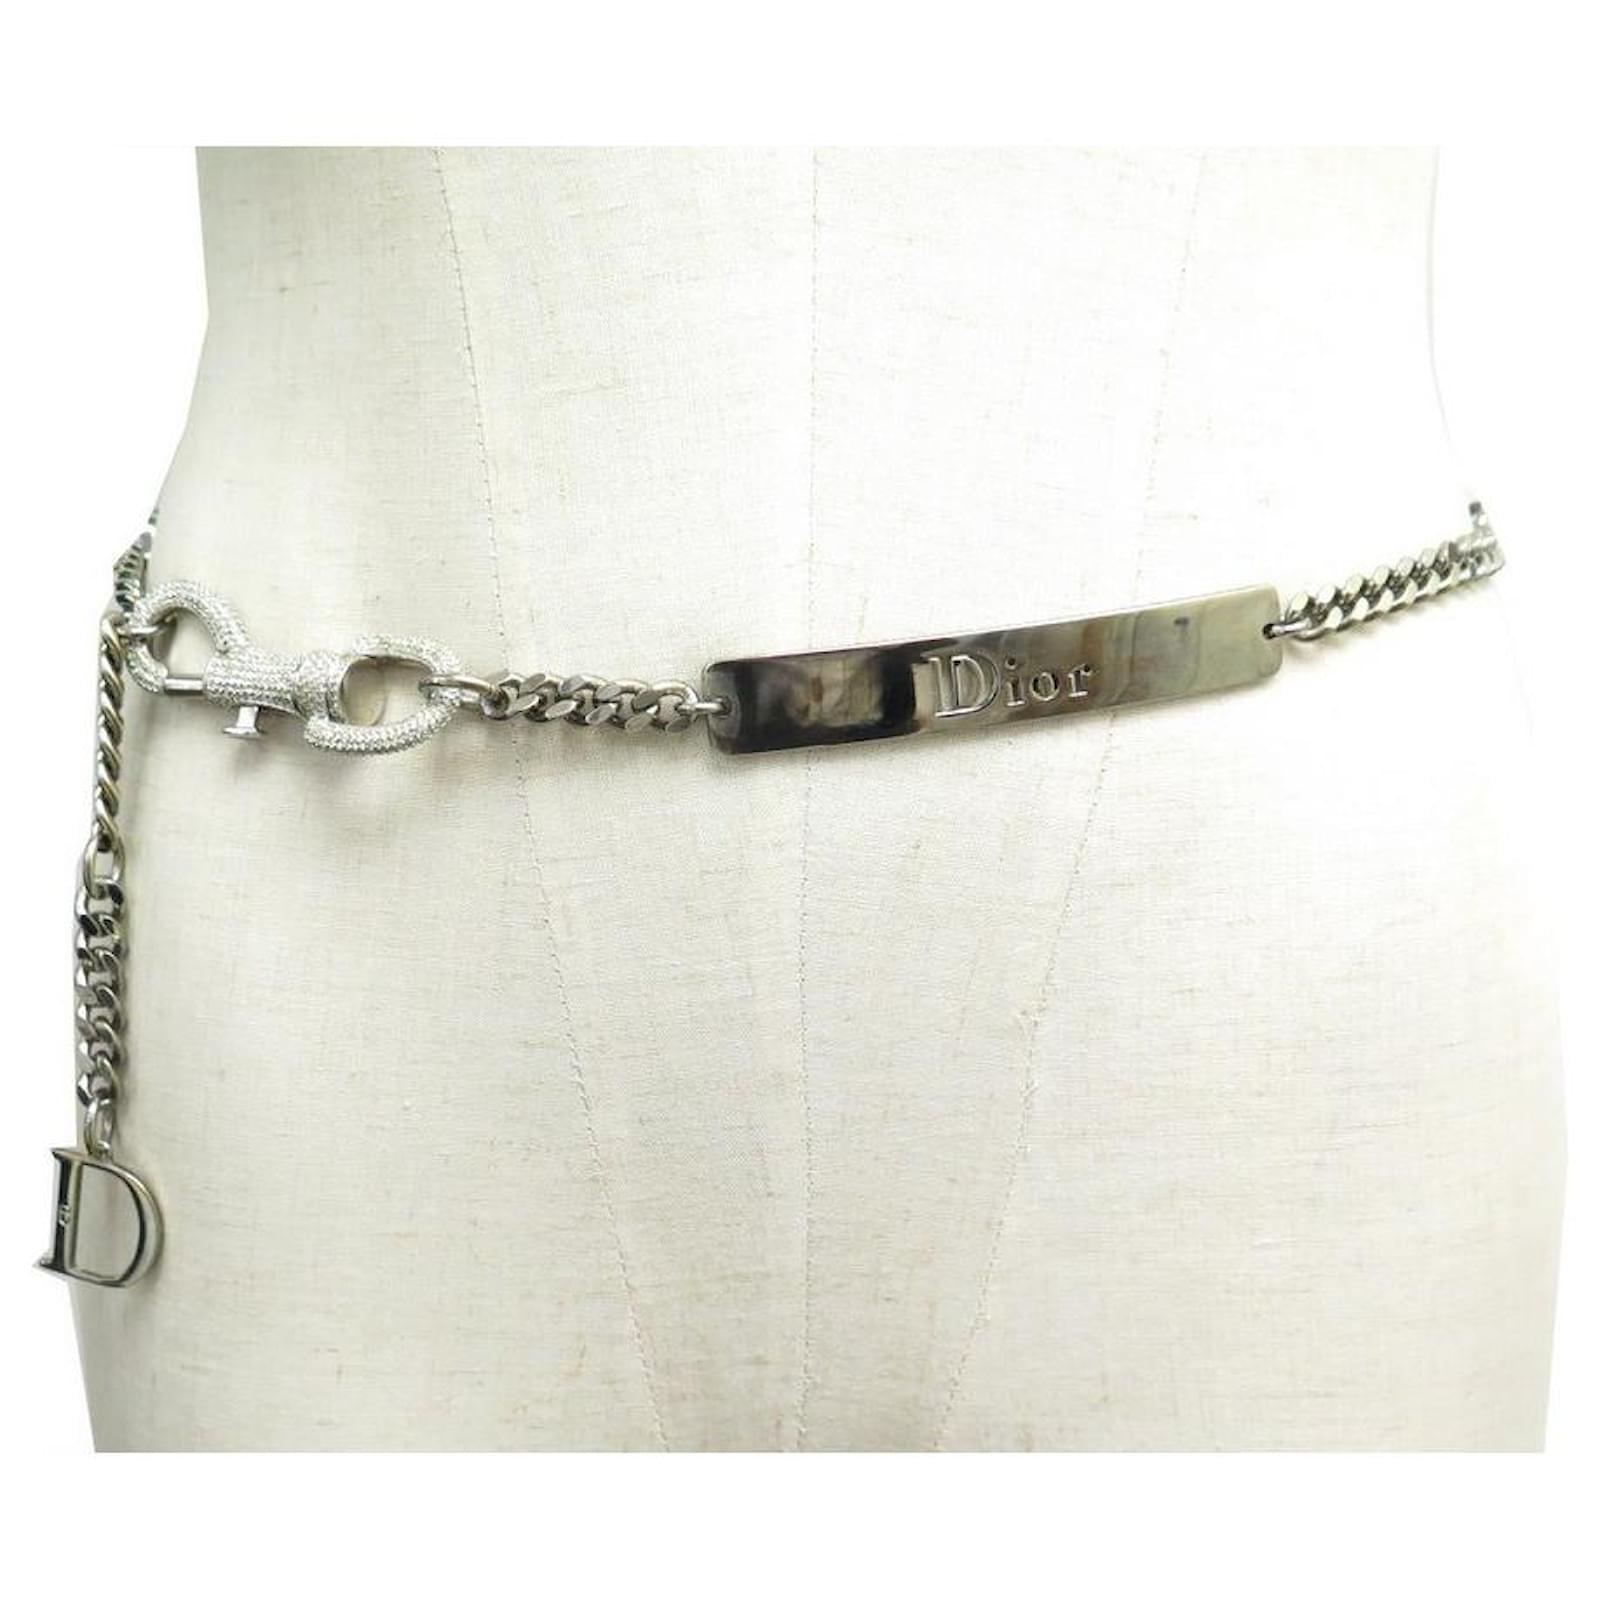 66276 auth CHRISTIAN DIOR silver metal 2003 STRASS PAVE DOG HOOK CHAIN Belt  85  eBay